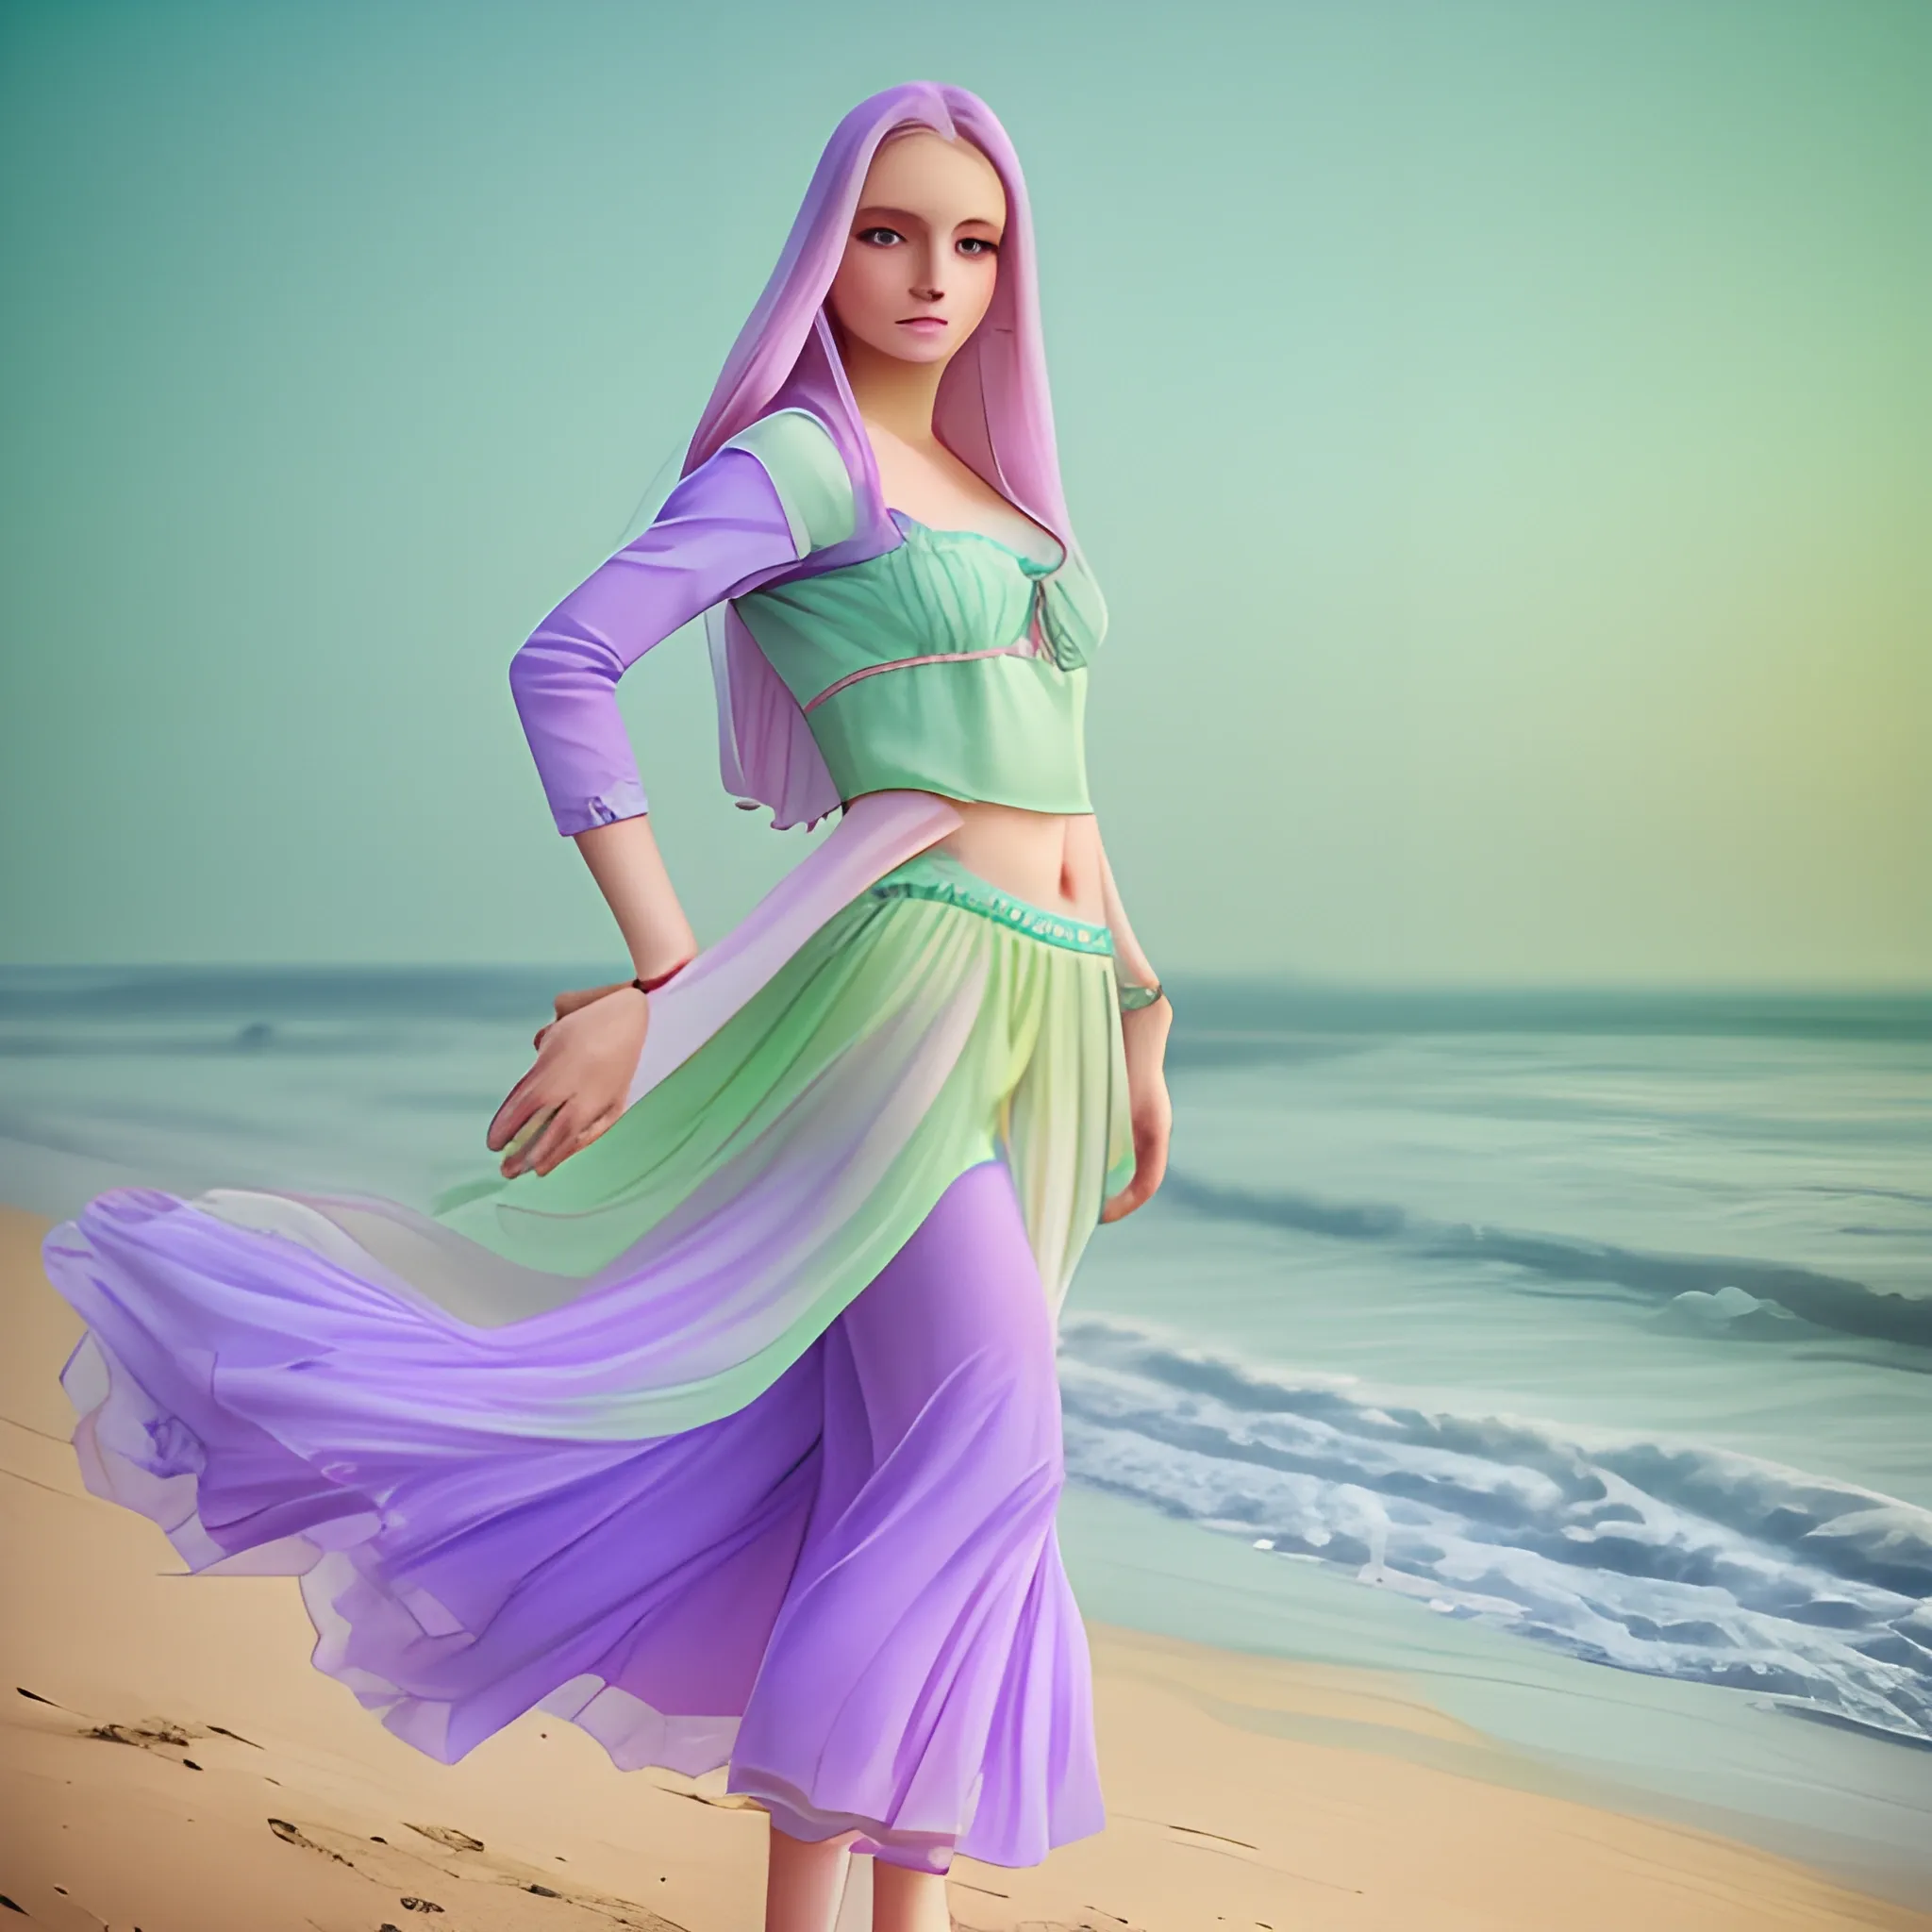 A beautiful Ukrainian beauty on the beach in pastel colors of green and purple mist, full body shot, professional photography